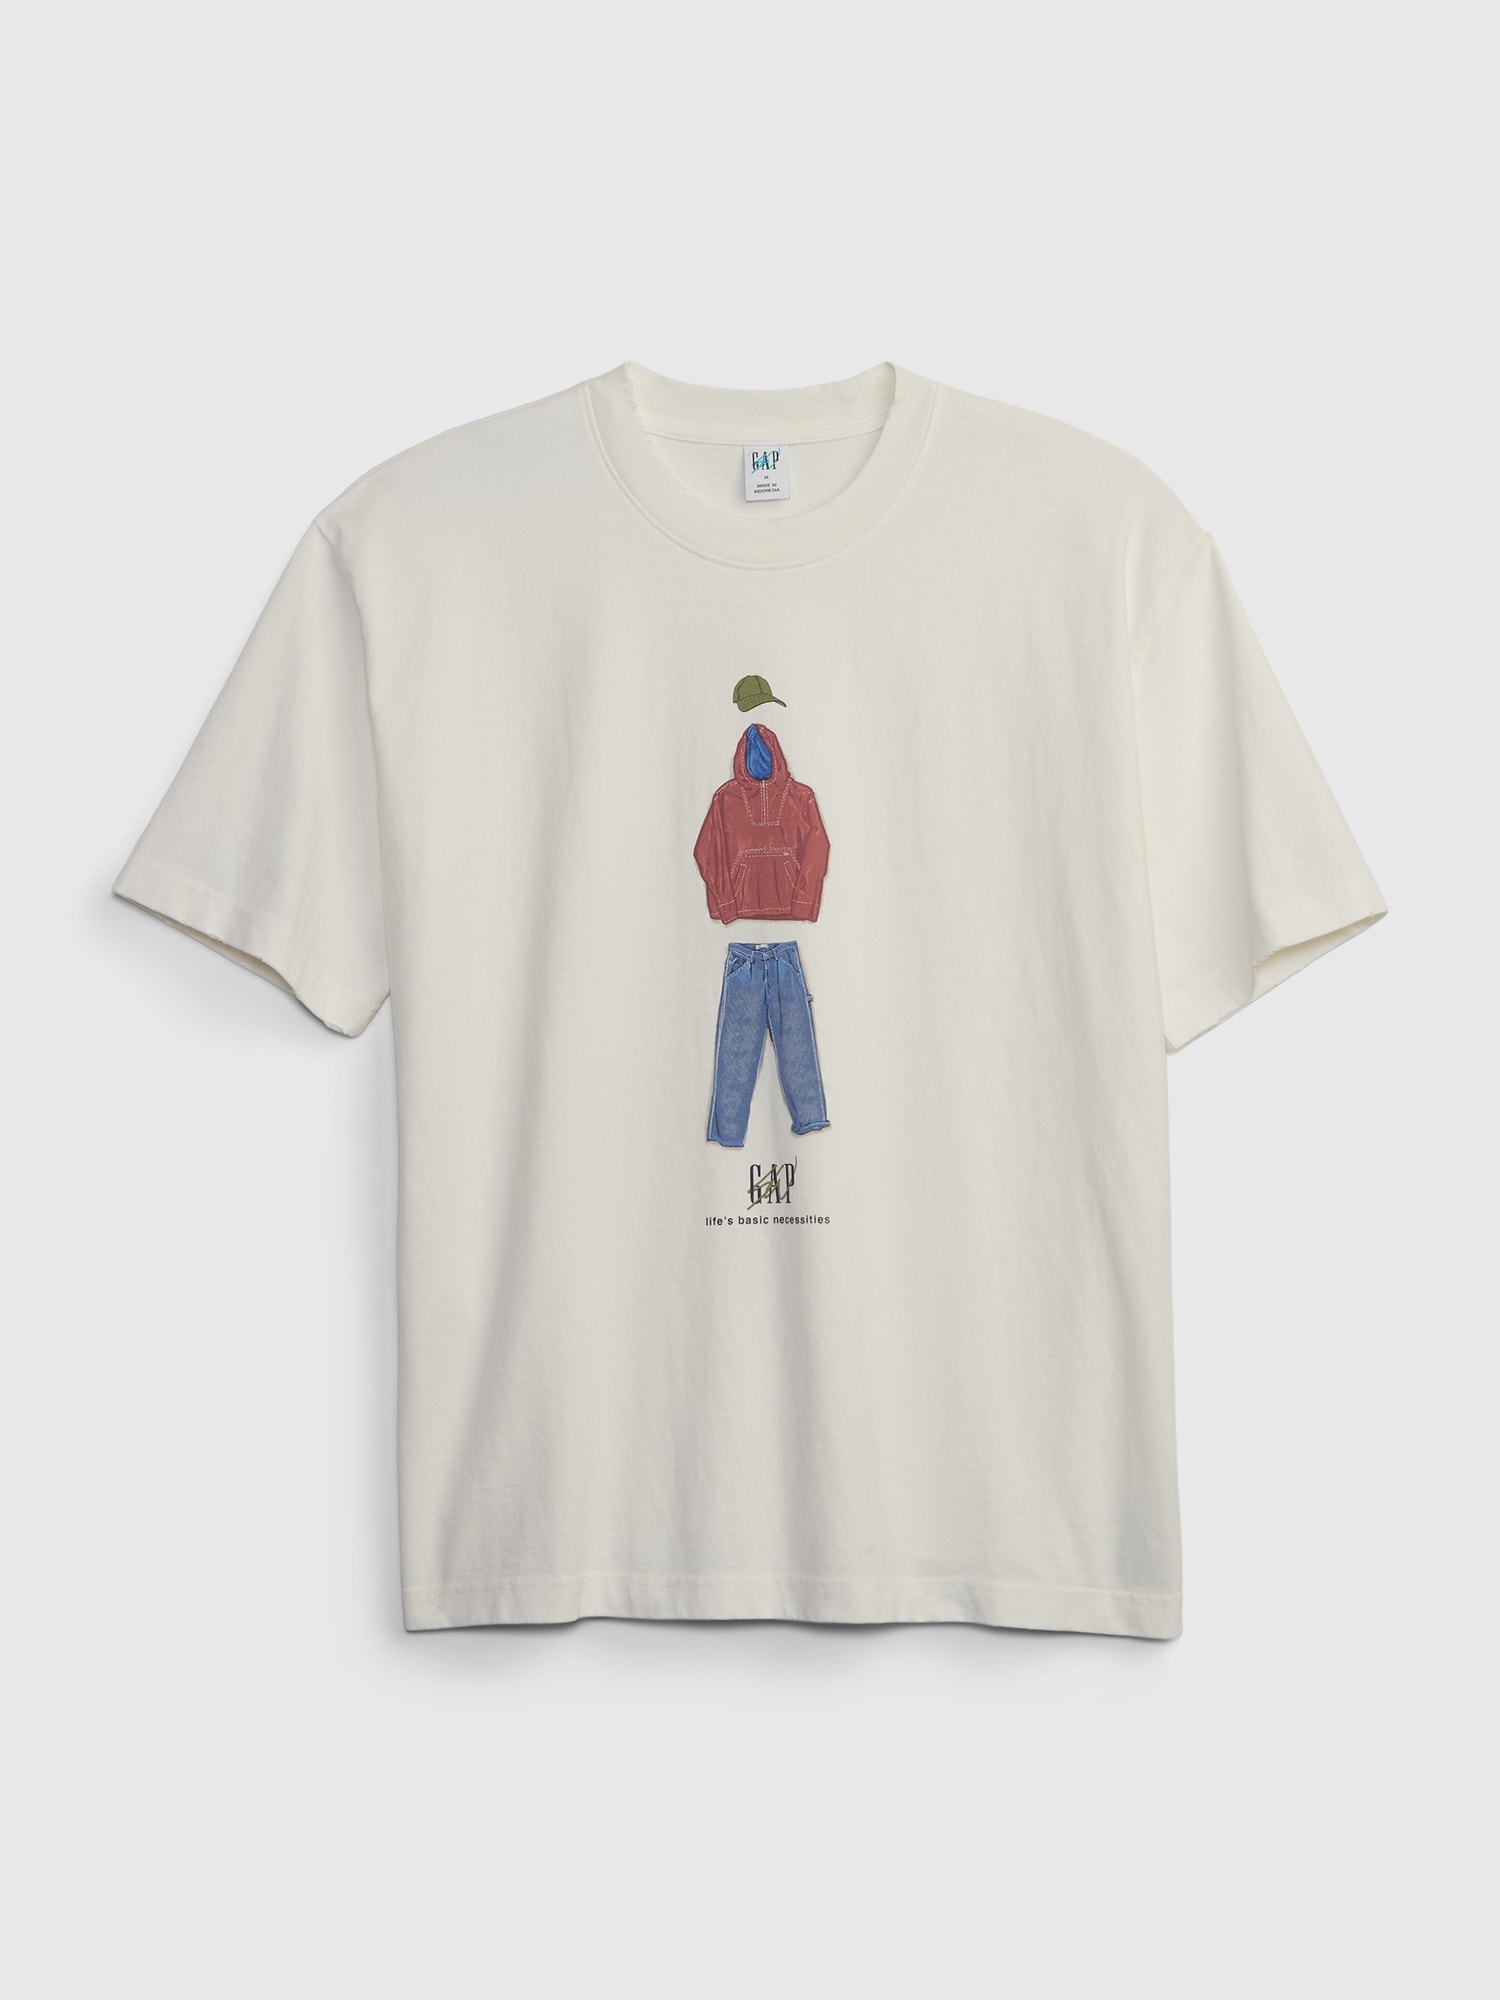 Re-Issue by Sean Wotherspoon グラフィックTシャツ(ユニセックス)